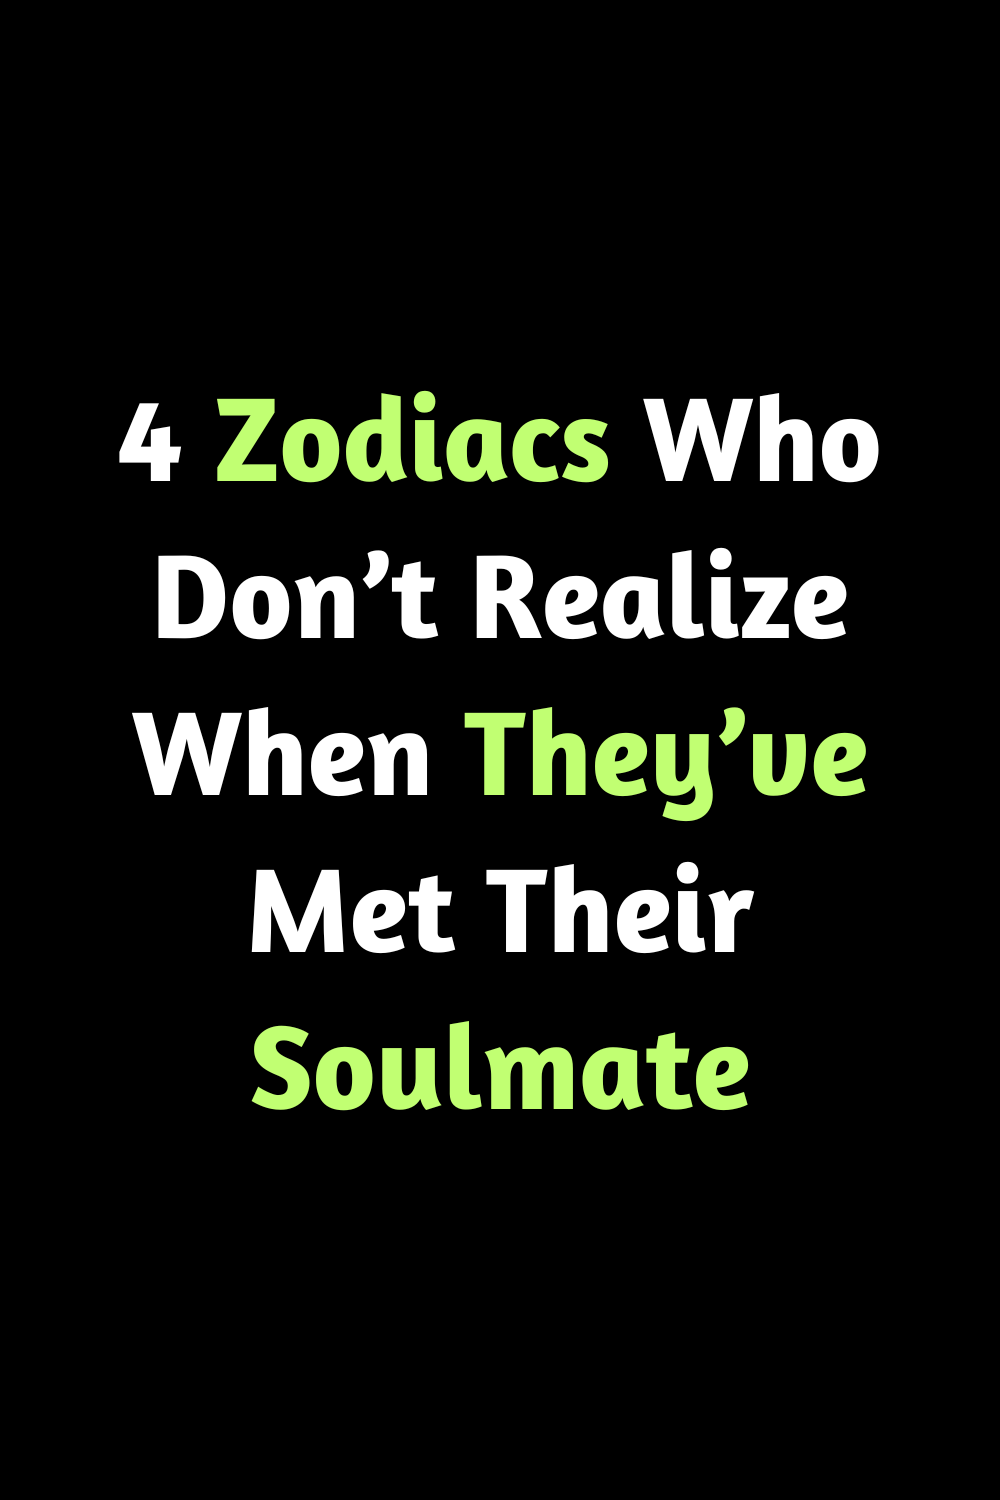 4 Zodiacs Who Don’t Realize When They’ve Met Their Soulmate – Zodiac Heist